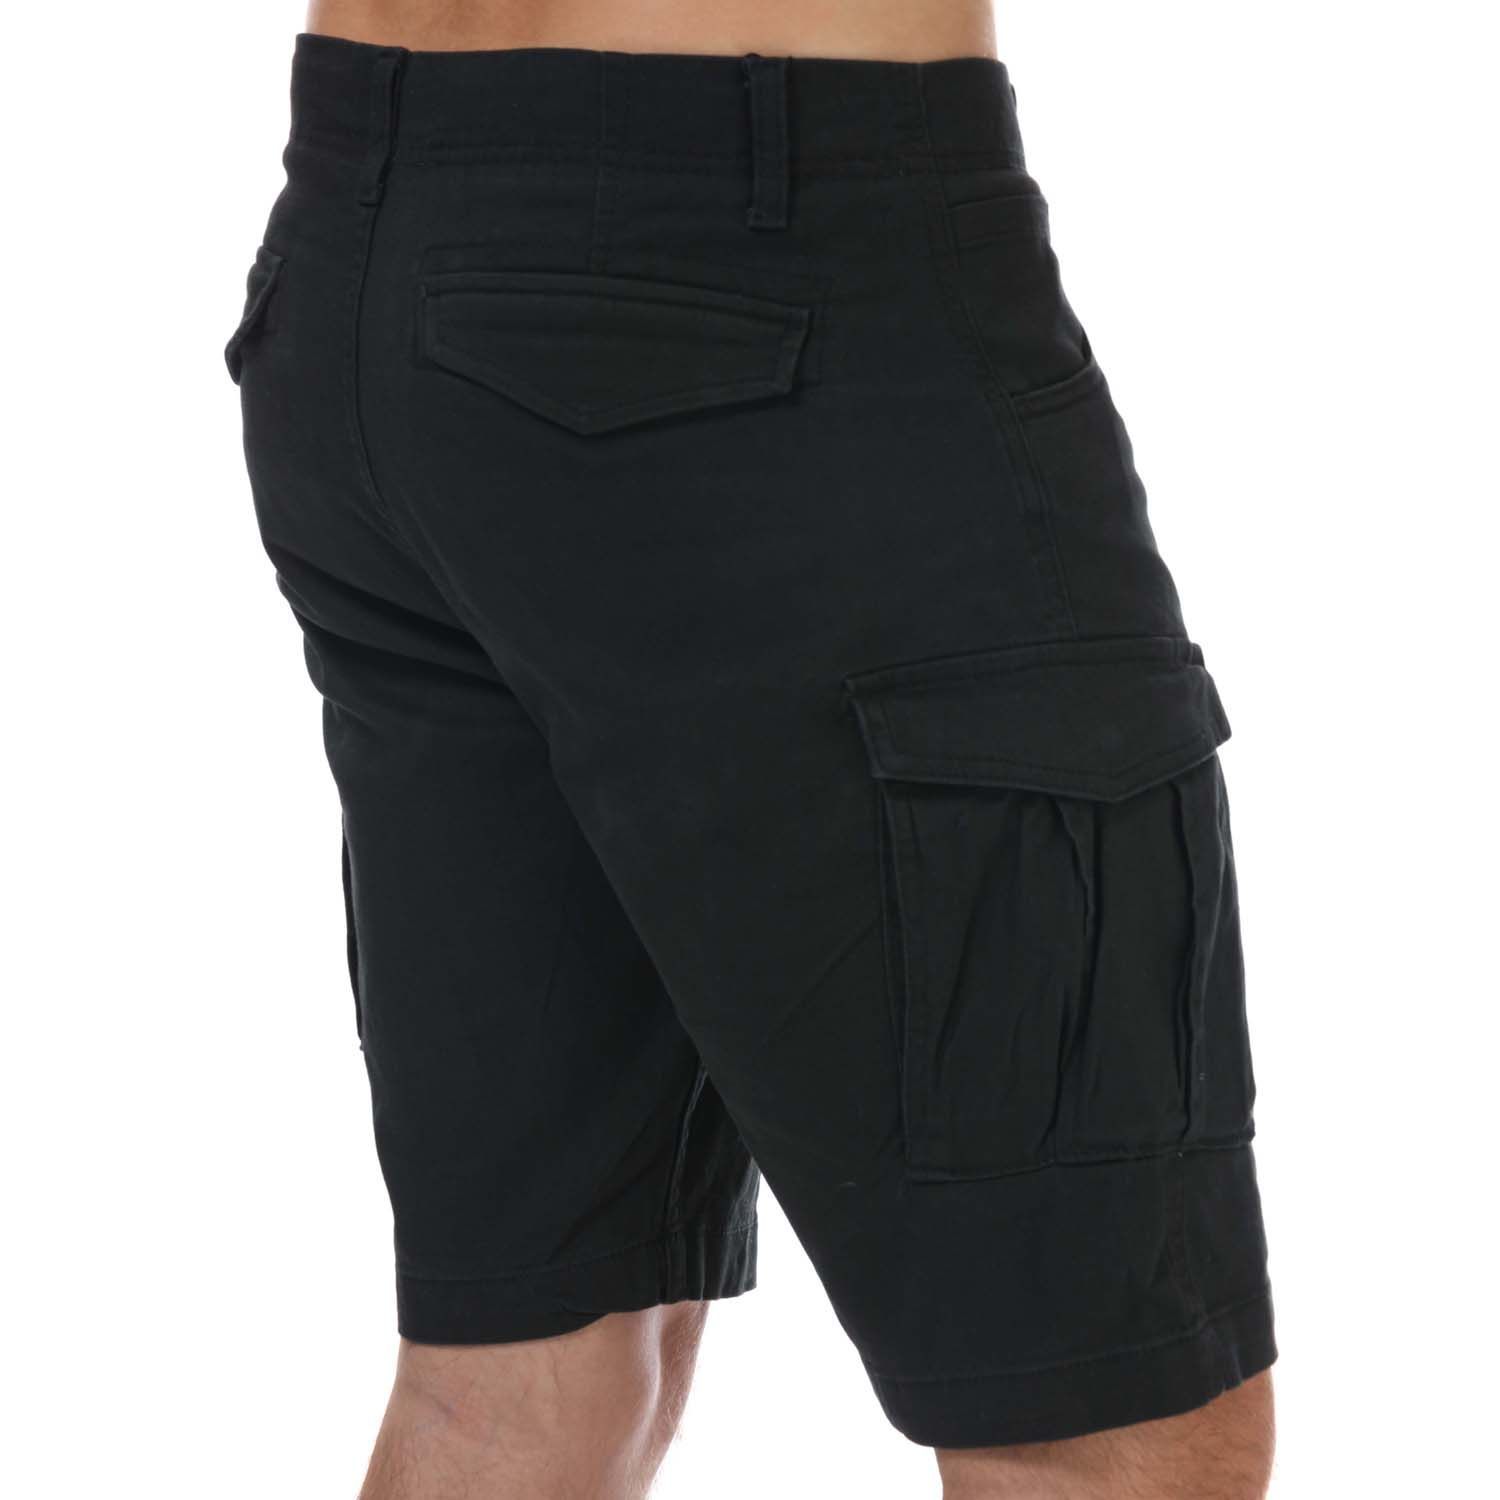 Mens Jack Jones Basic Cargo Shorts in black.- Zip fly with button fastening.- Pockets to sides and reverse.- Zip and press stud pockets to thighs.- Belt loops to waist.- Branding to thigh pocket.- 98% Cotton  12% Elastane. Machine wash at 30 degrees.- Ref: 12171180B